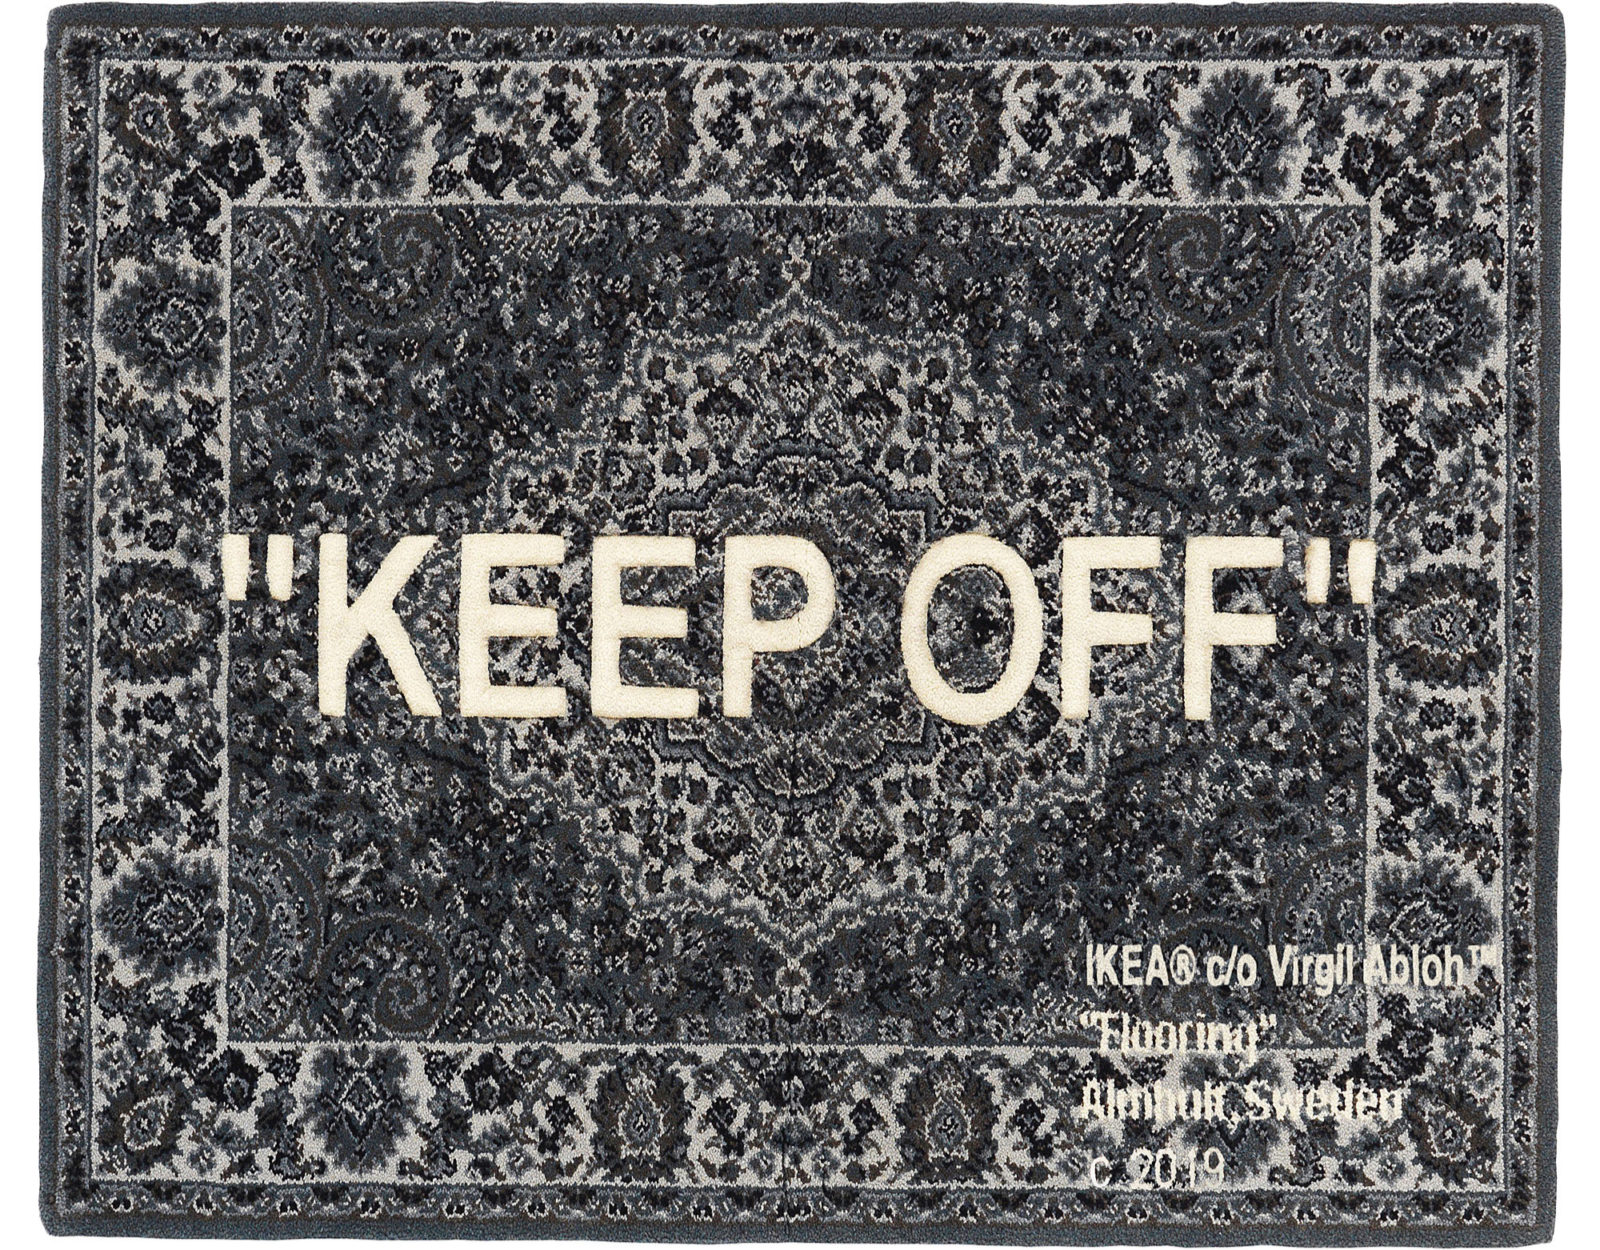 Grey rug, pattern inspired by Persian rugs, large white text across says, in capital letters, 'Keep off'.